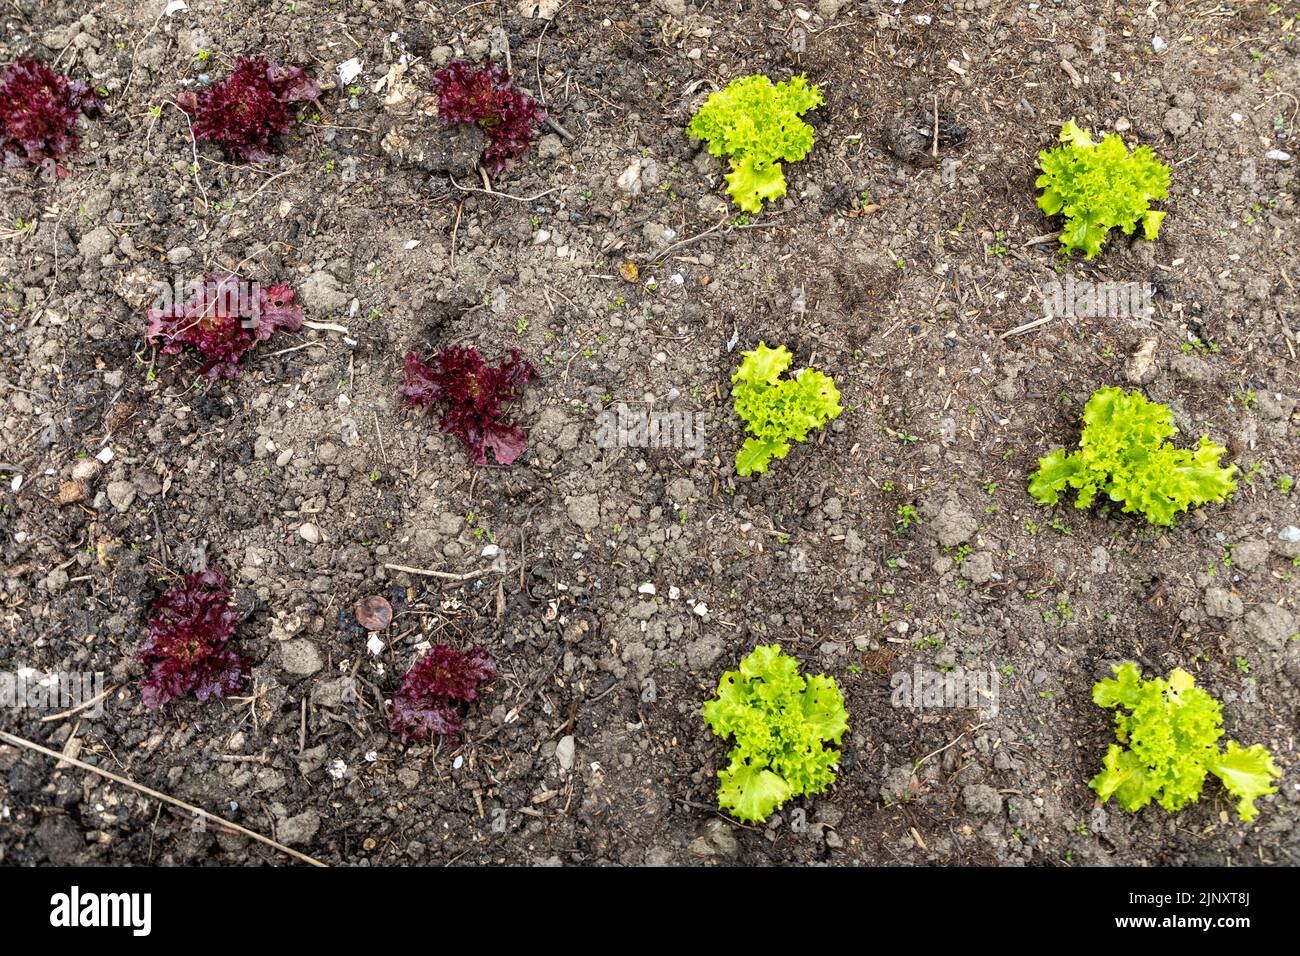 Two different types of young lettuce planted in a vegetable garden. Purple and green lettuce Stock Photo